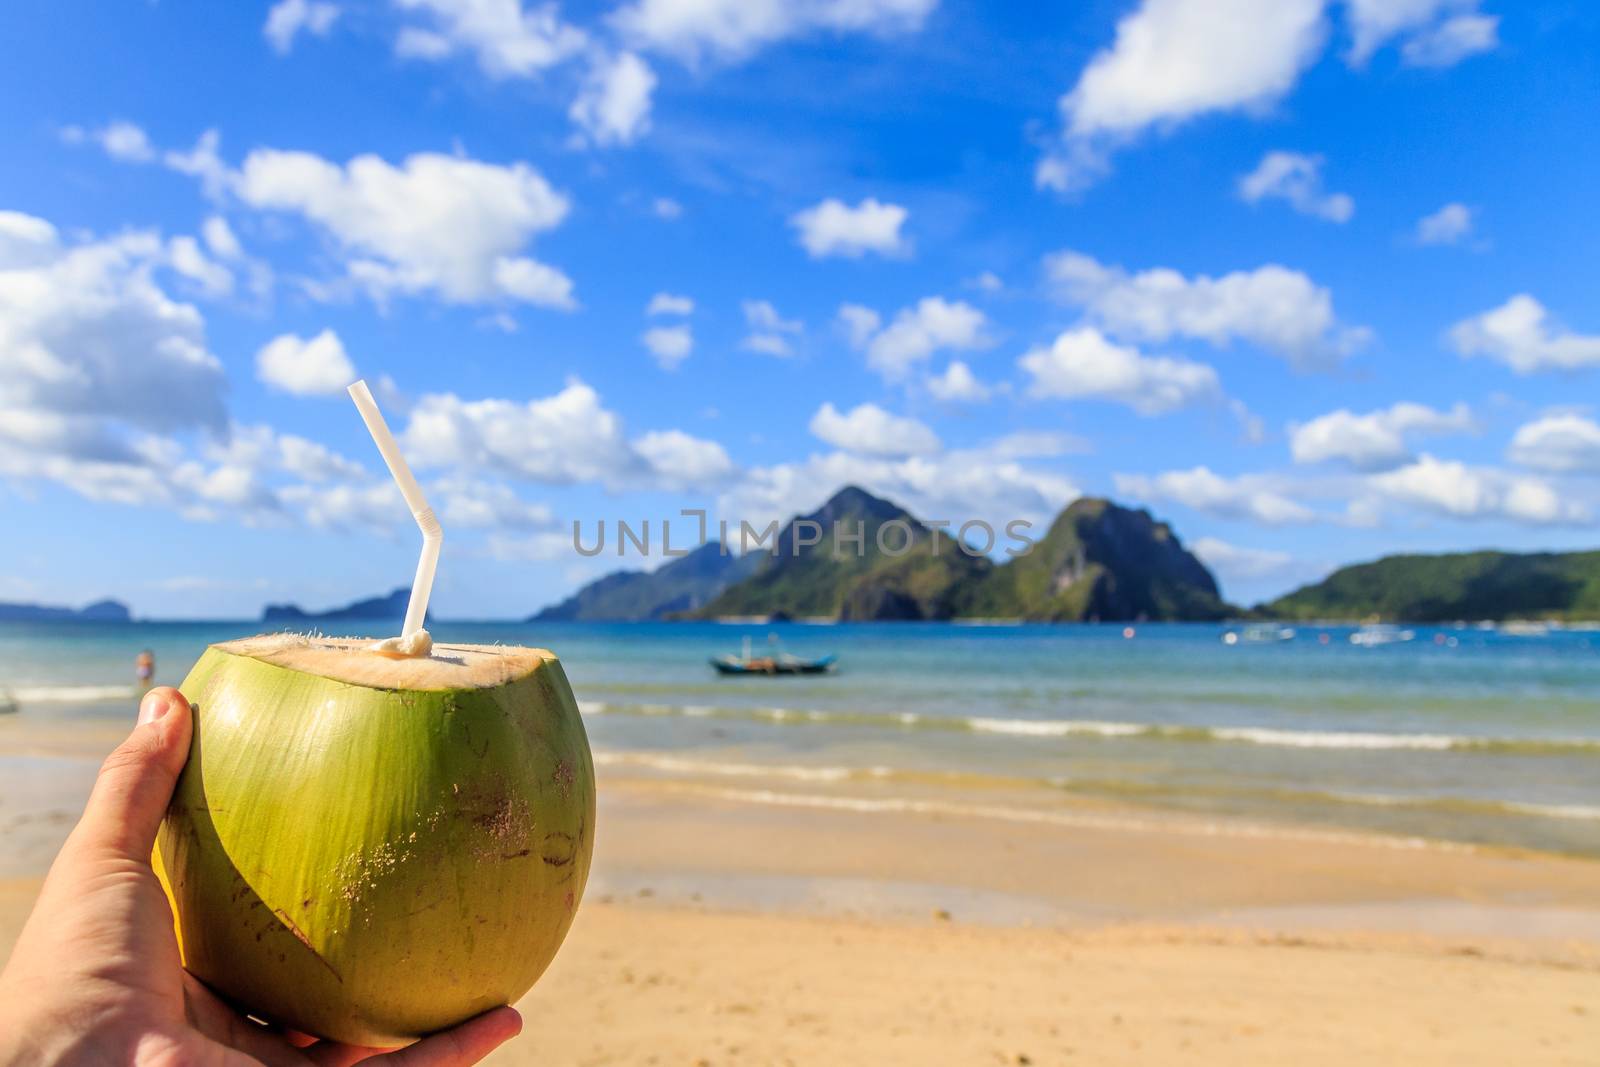 Hand holding a coconut coco loco coctail with straw, tropical islands, beach, sea and blue sky in the background, El Nido, Palawan, Phillipines